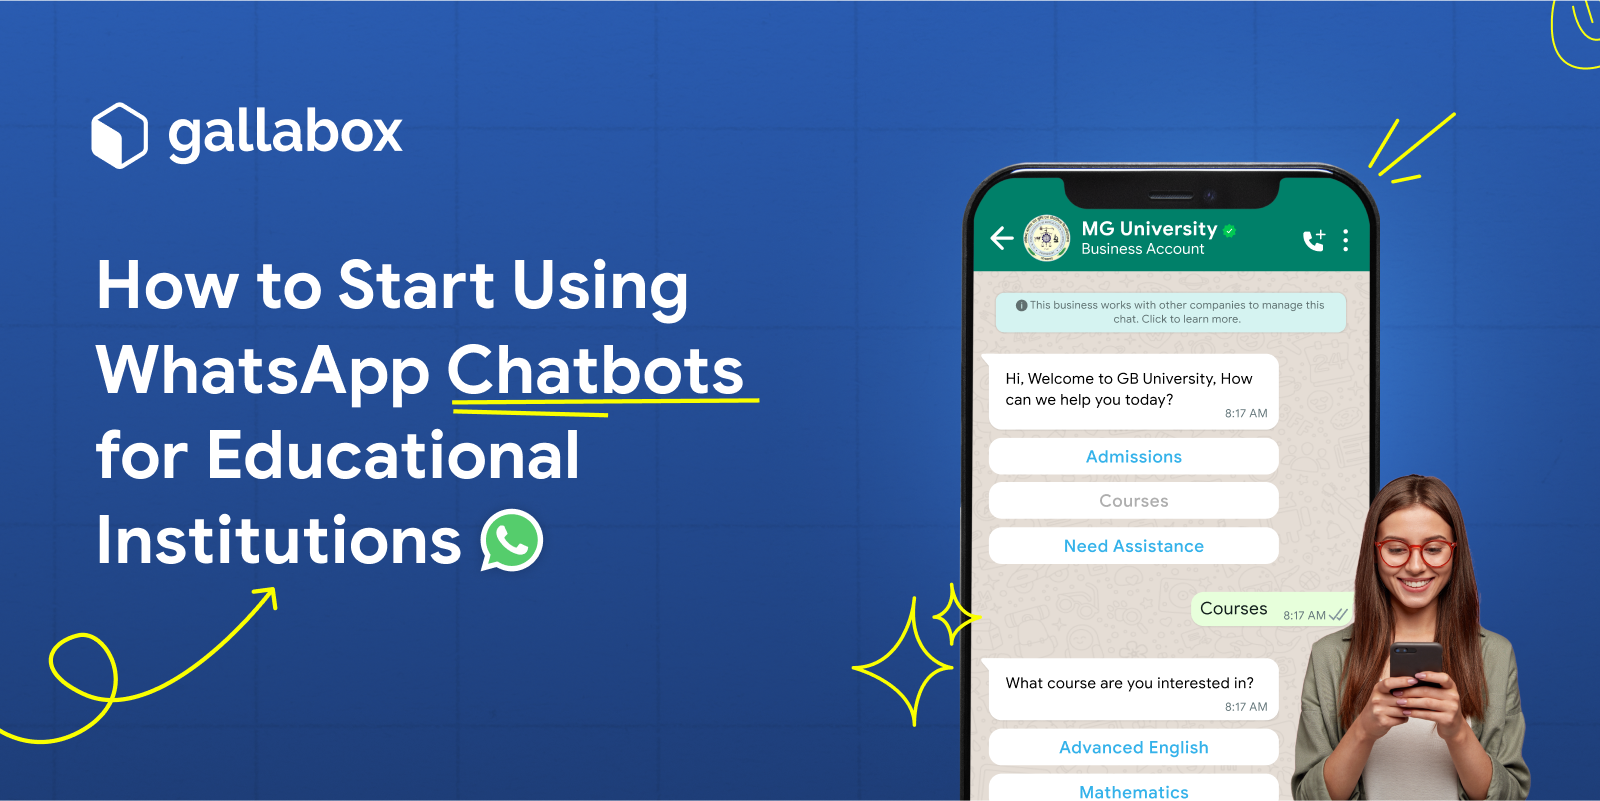 How to Start Using WhatsApp Chatbots for Educational Institutions